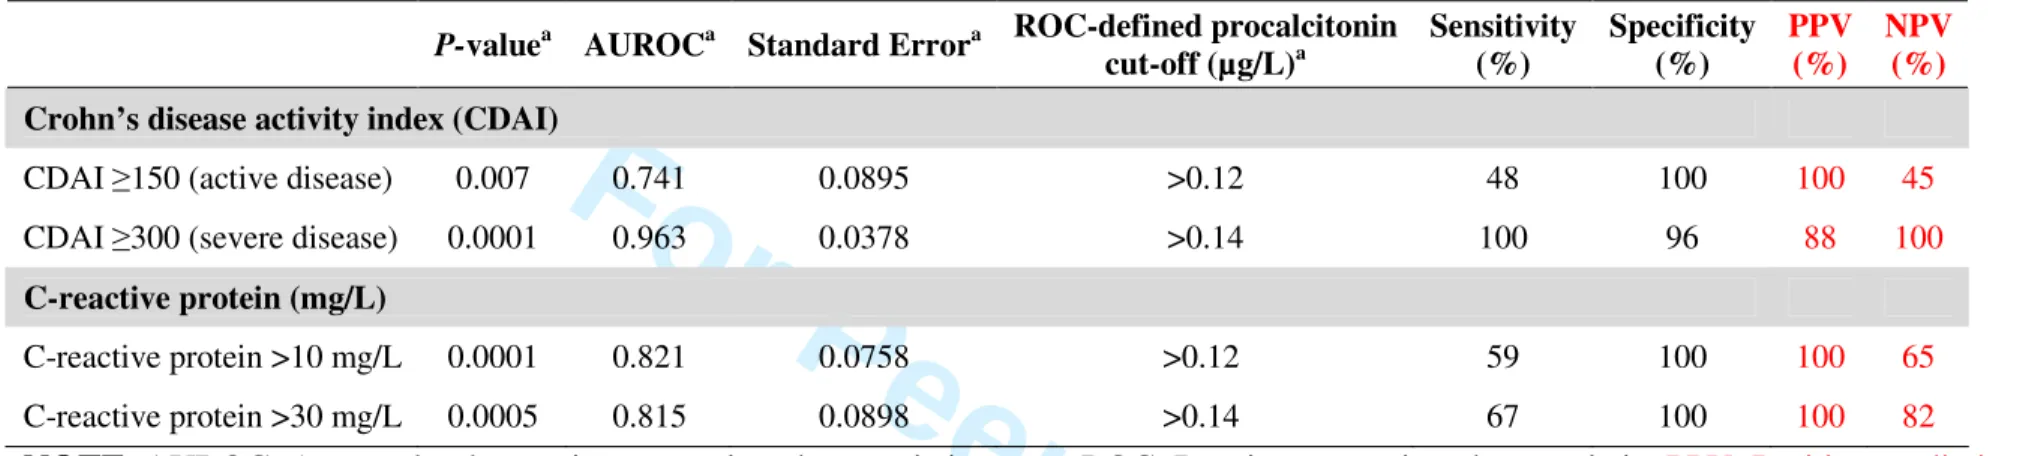 Table 4. Diagnostic accuracy of serum procalcitonin (µg/L) according to ‘a priori’ defined cut-offs for disease activity in patients with  Crohn’s disease 